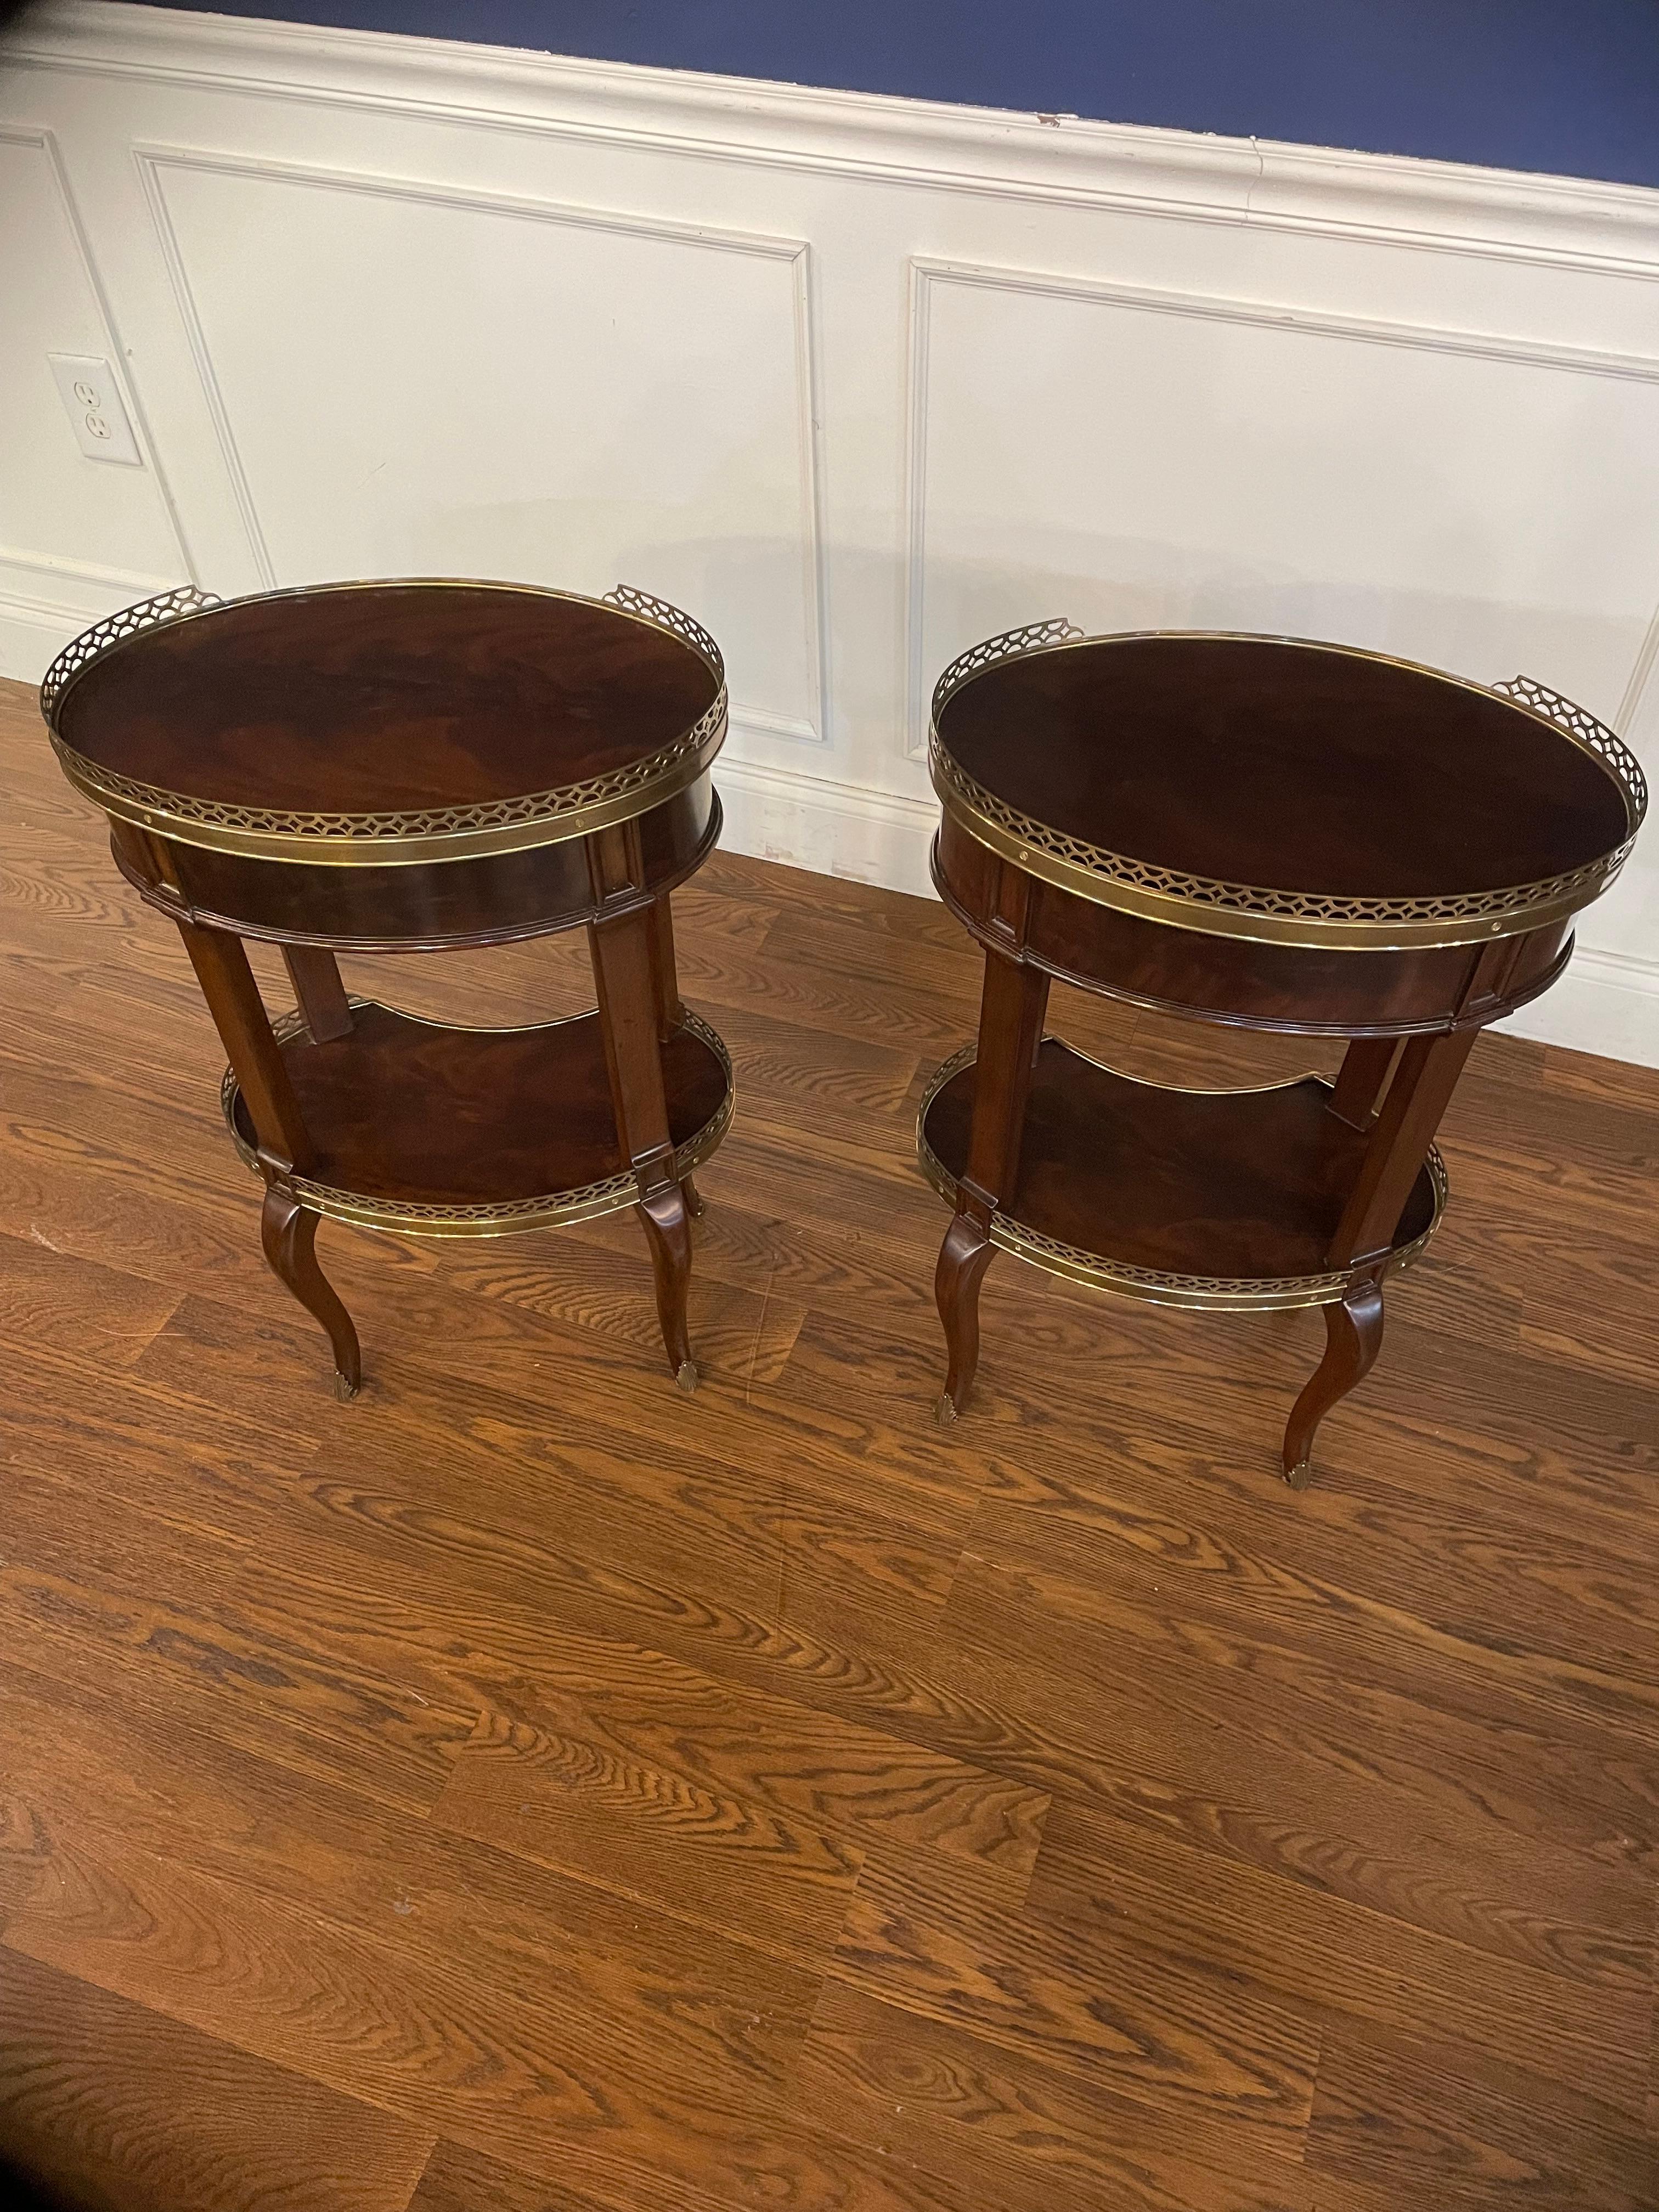 Pair of Kidney Shaped Mahogany Lamp Tables by Leighton Hall - Showroom Samples In Good Condition For Sale In Suwanee, GA